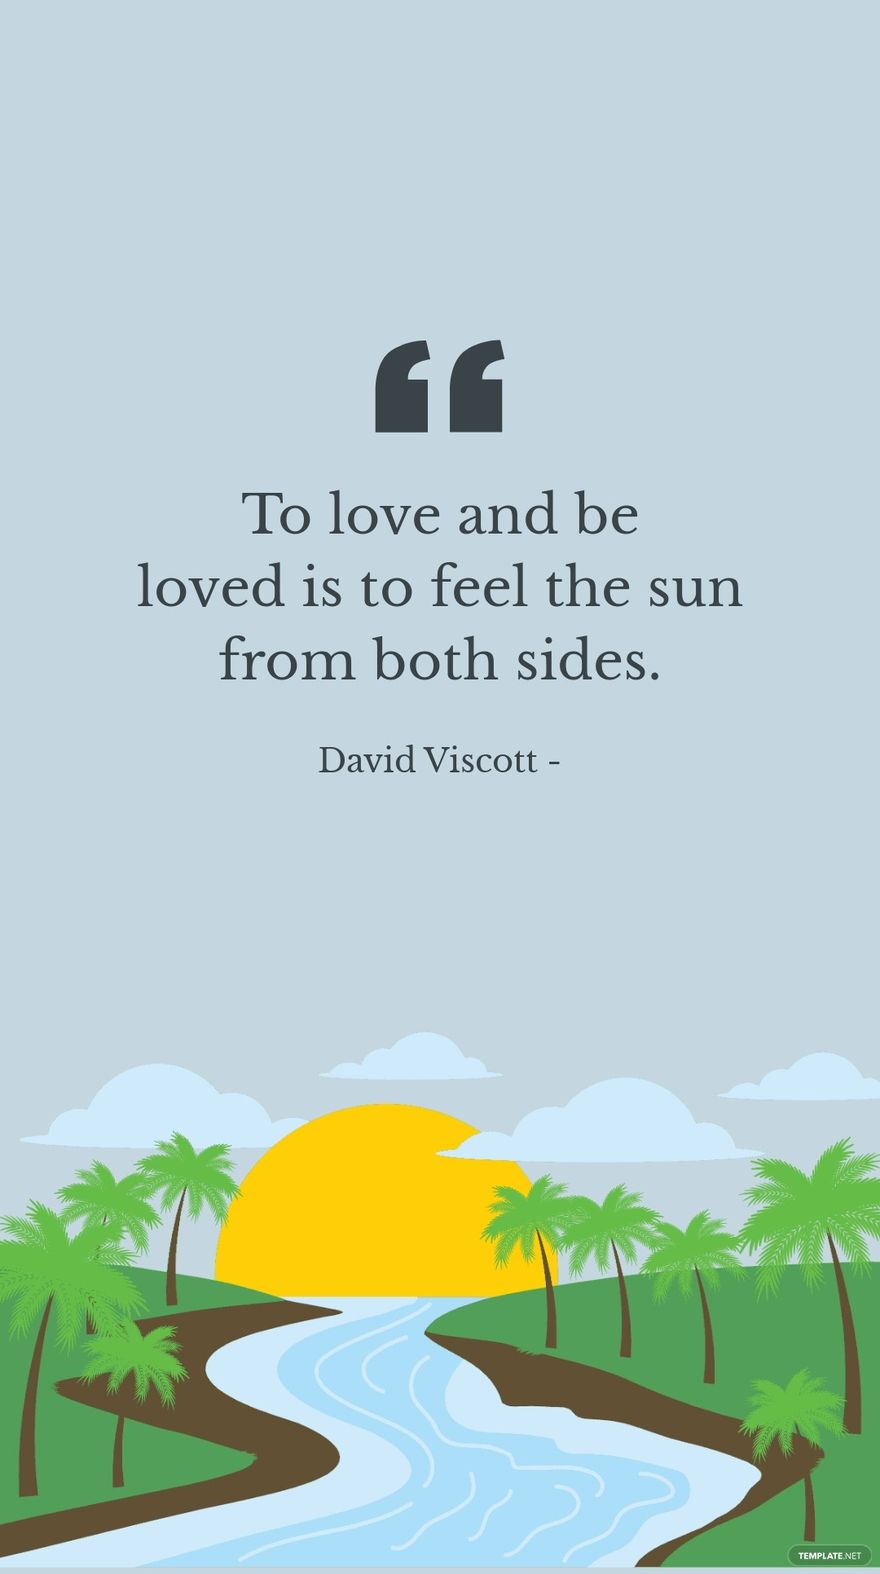 Free David Viscott - To love and be loved is to feel the sun from both sides.